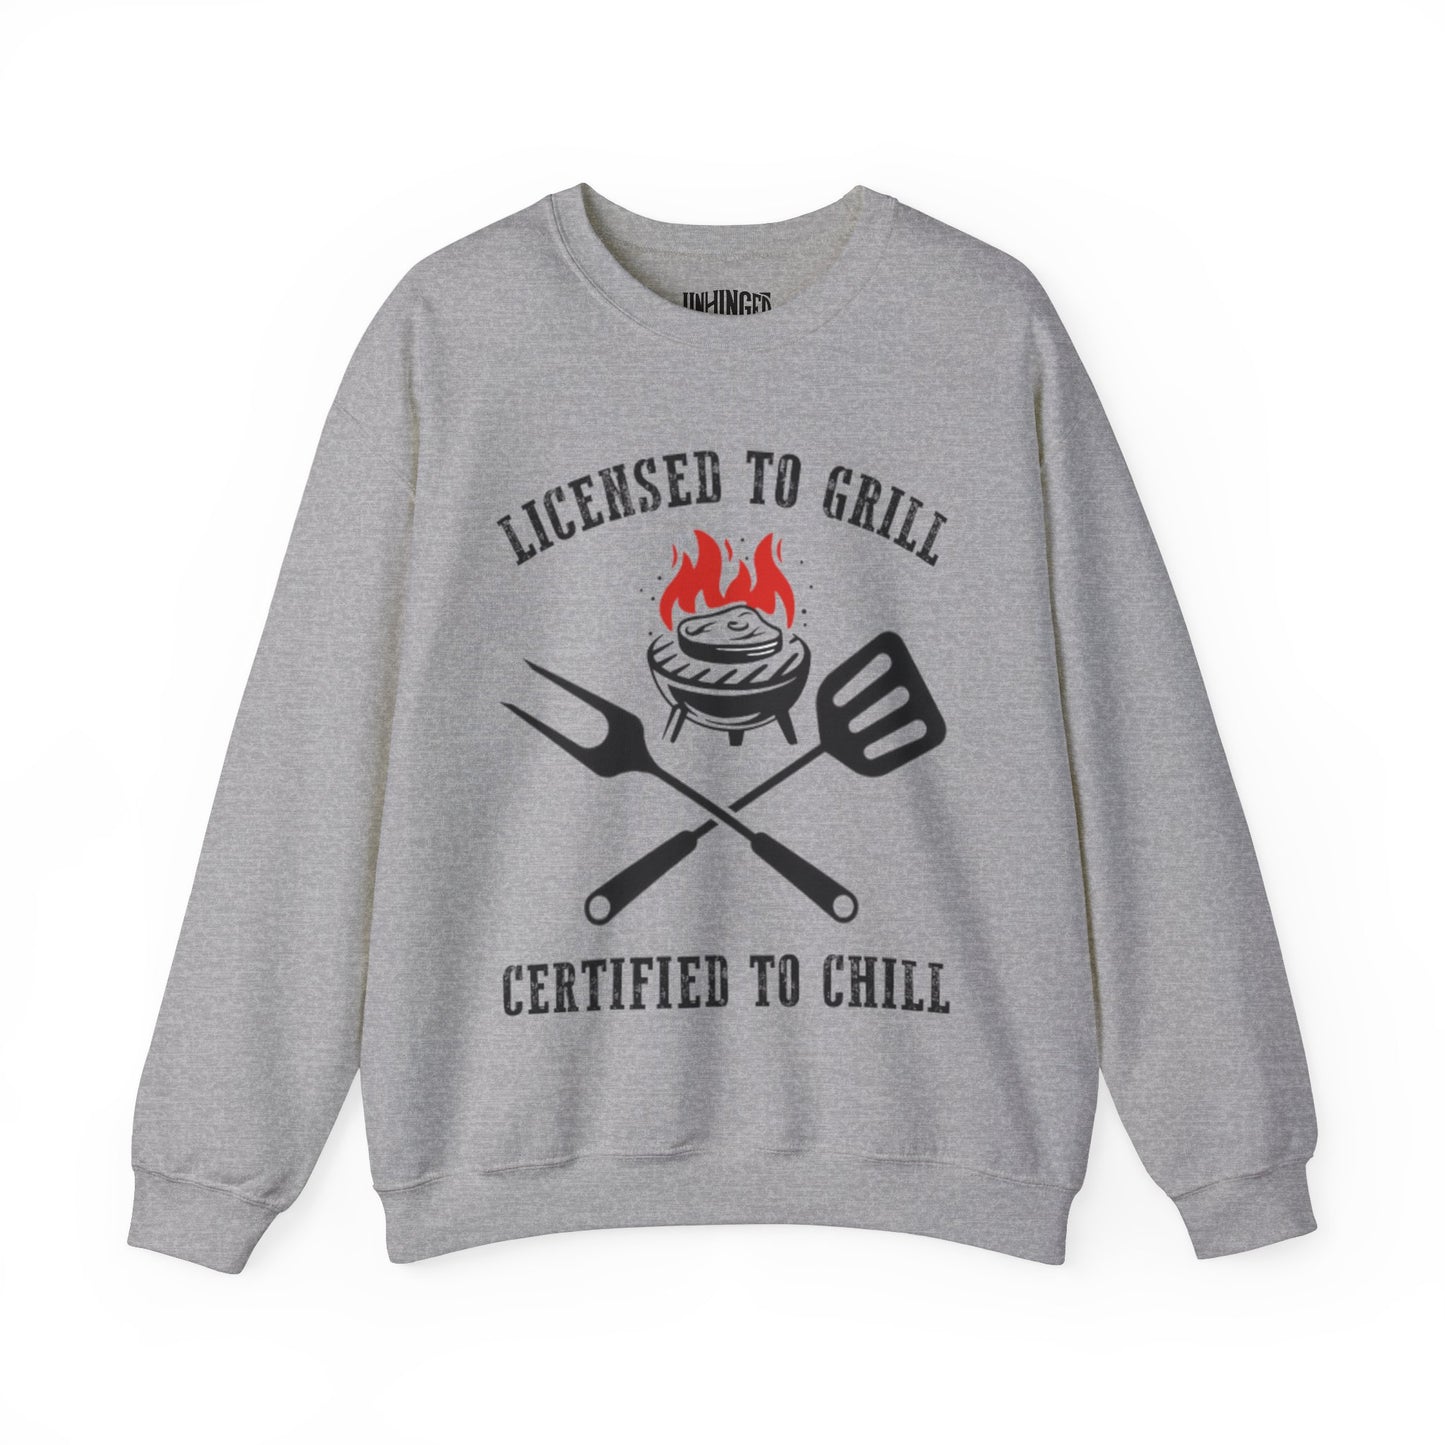 Licensed to Grill Certified to Chill™ Crewneck Sweatshirt